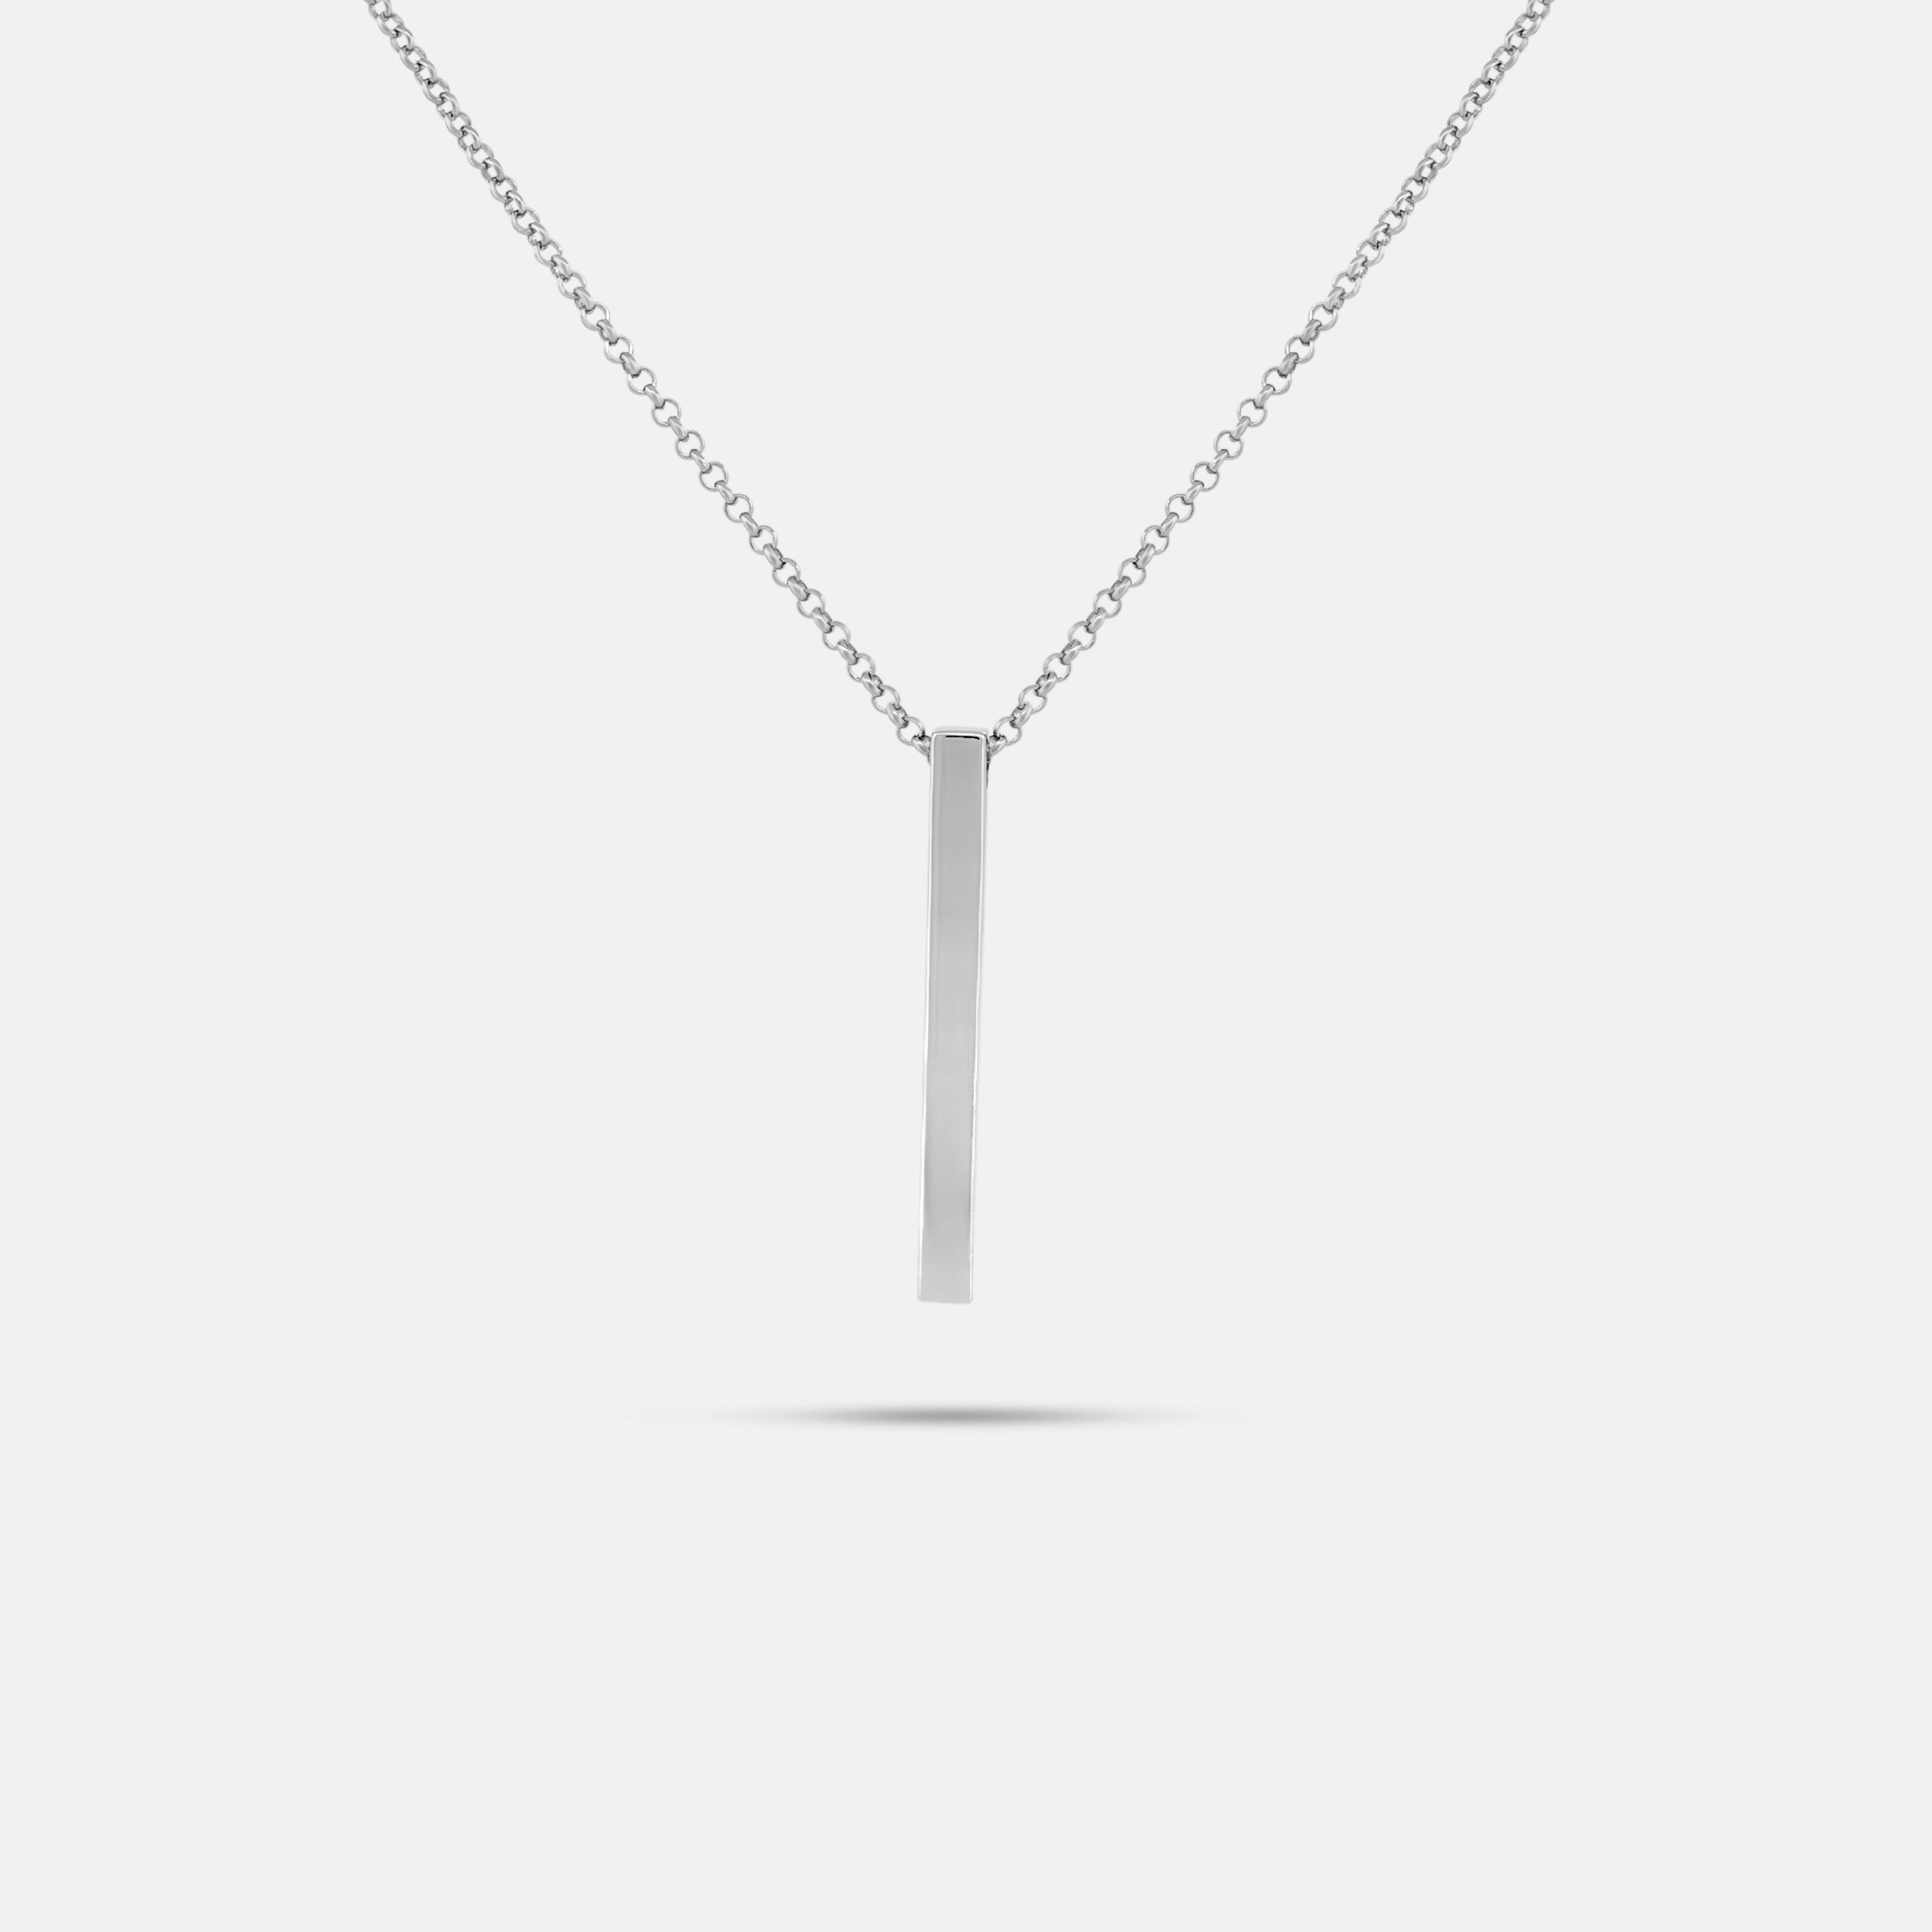 Front of 925 Silver Slim Rectangular Bar Pendant Necklace and Sterling Silver Rolo Chain